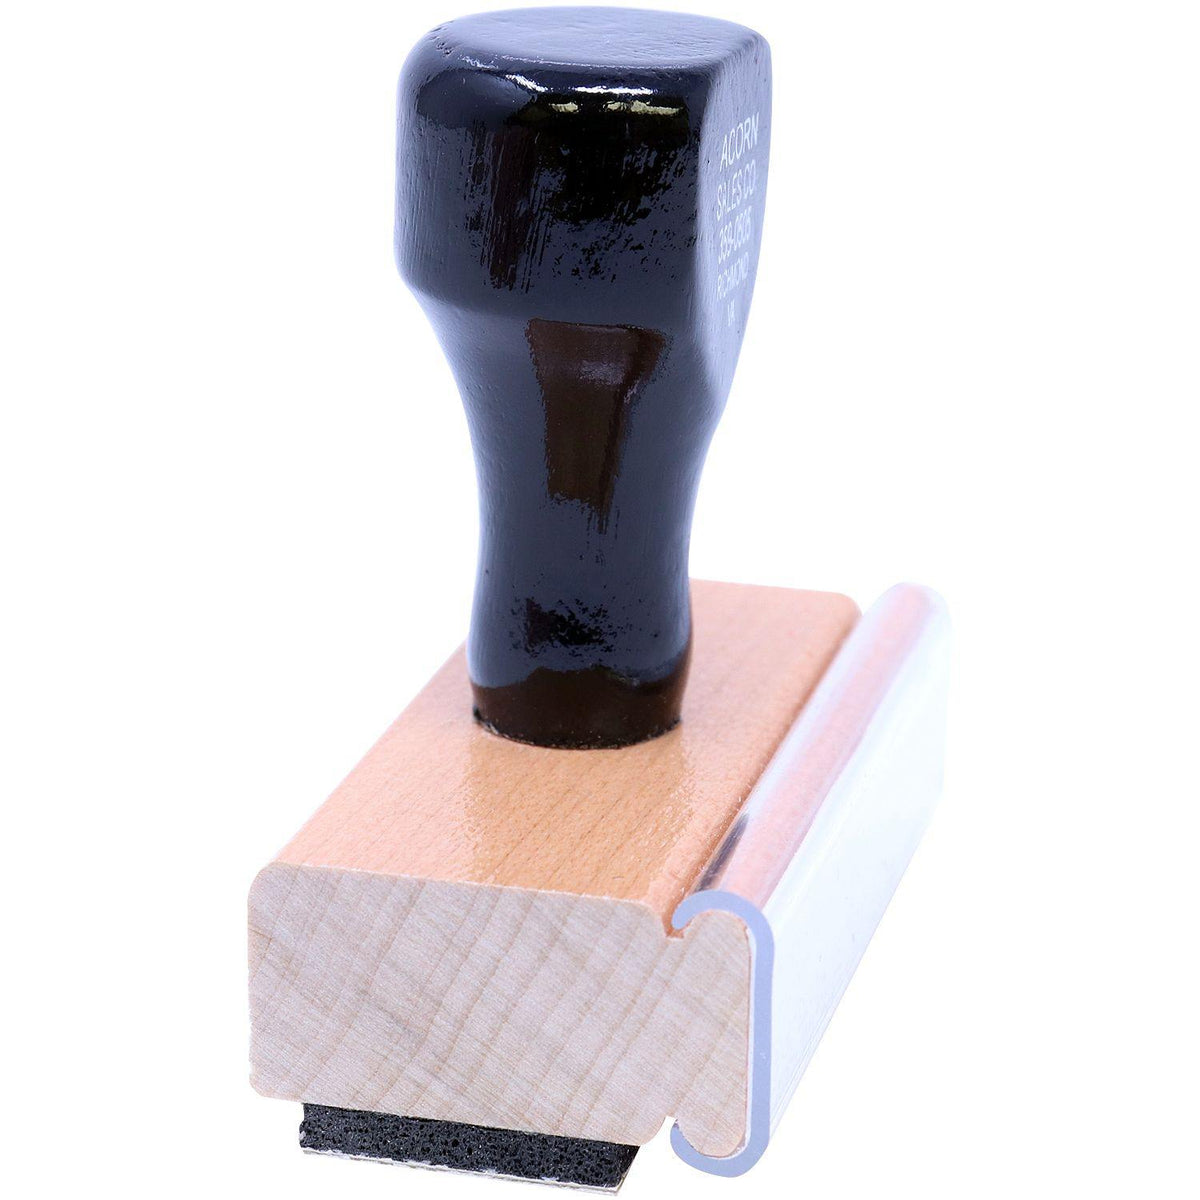 Side View of Credit Cards Rubber Stamp at an Angle